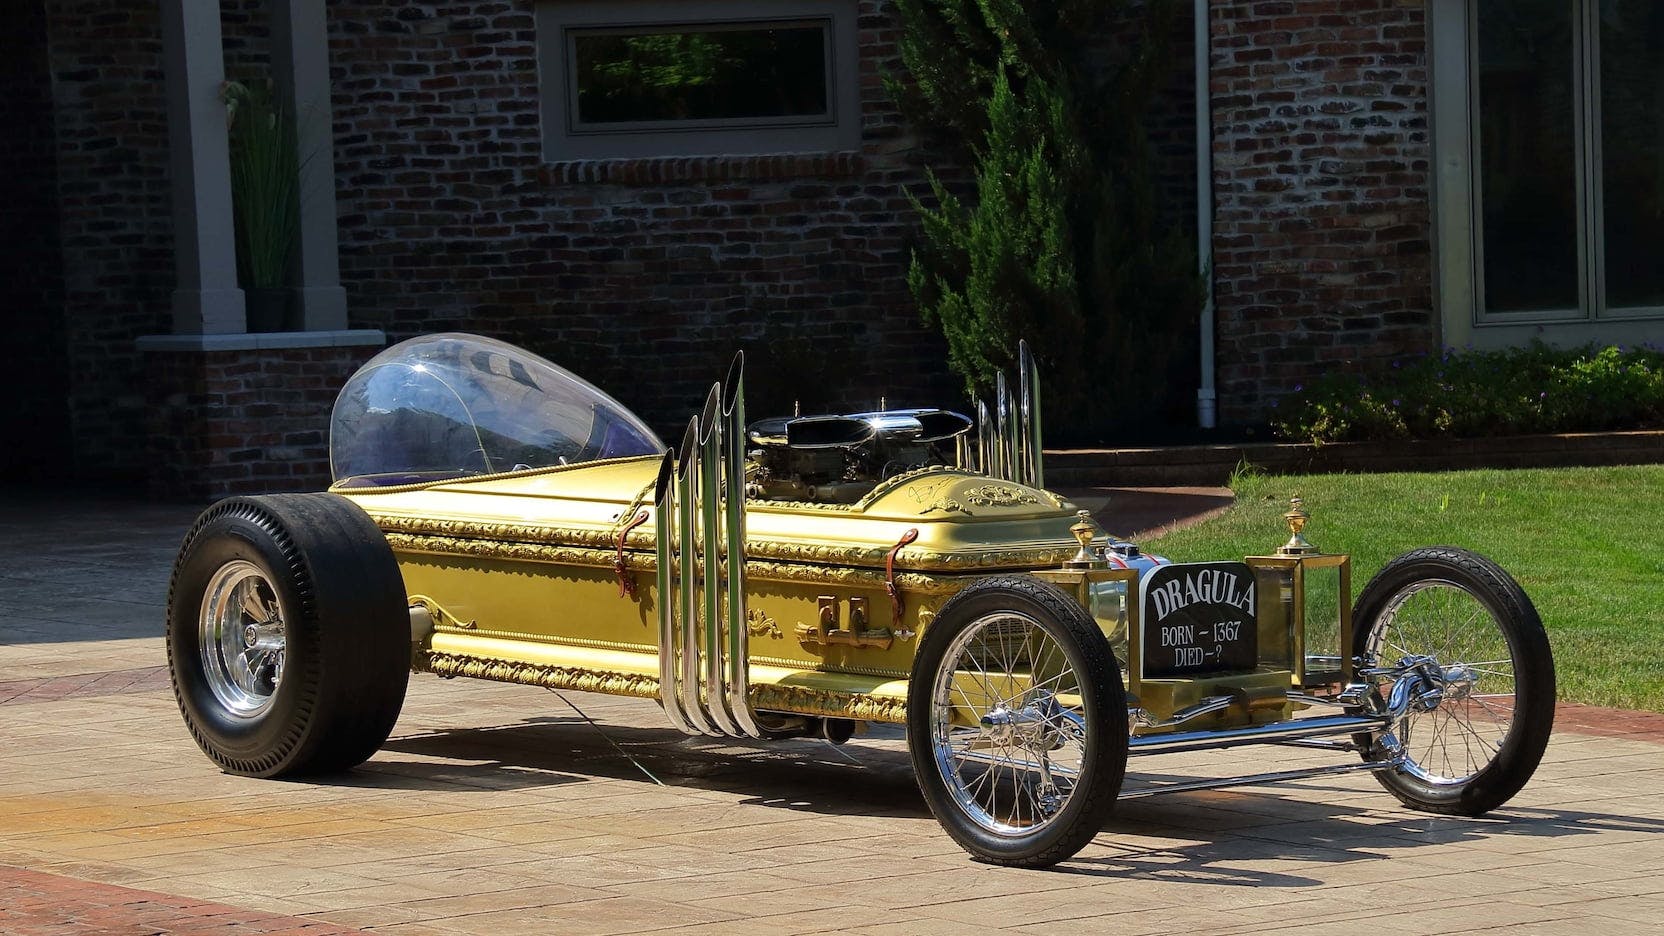 Will 2022 be the year you drive something weird and wonderful? Here are 9 oddballs for the bold